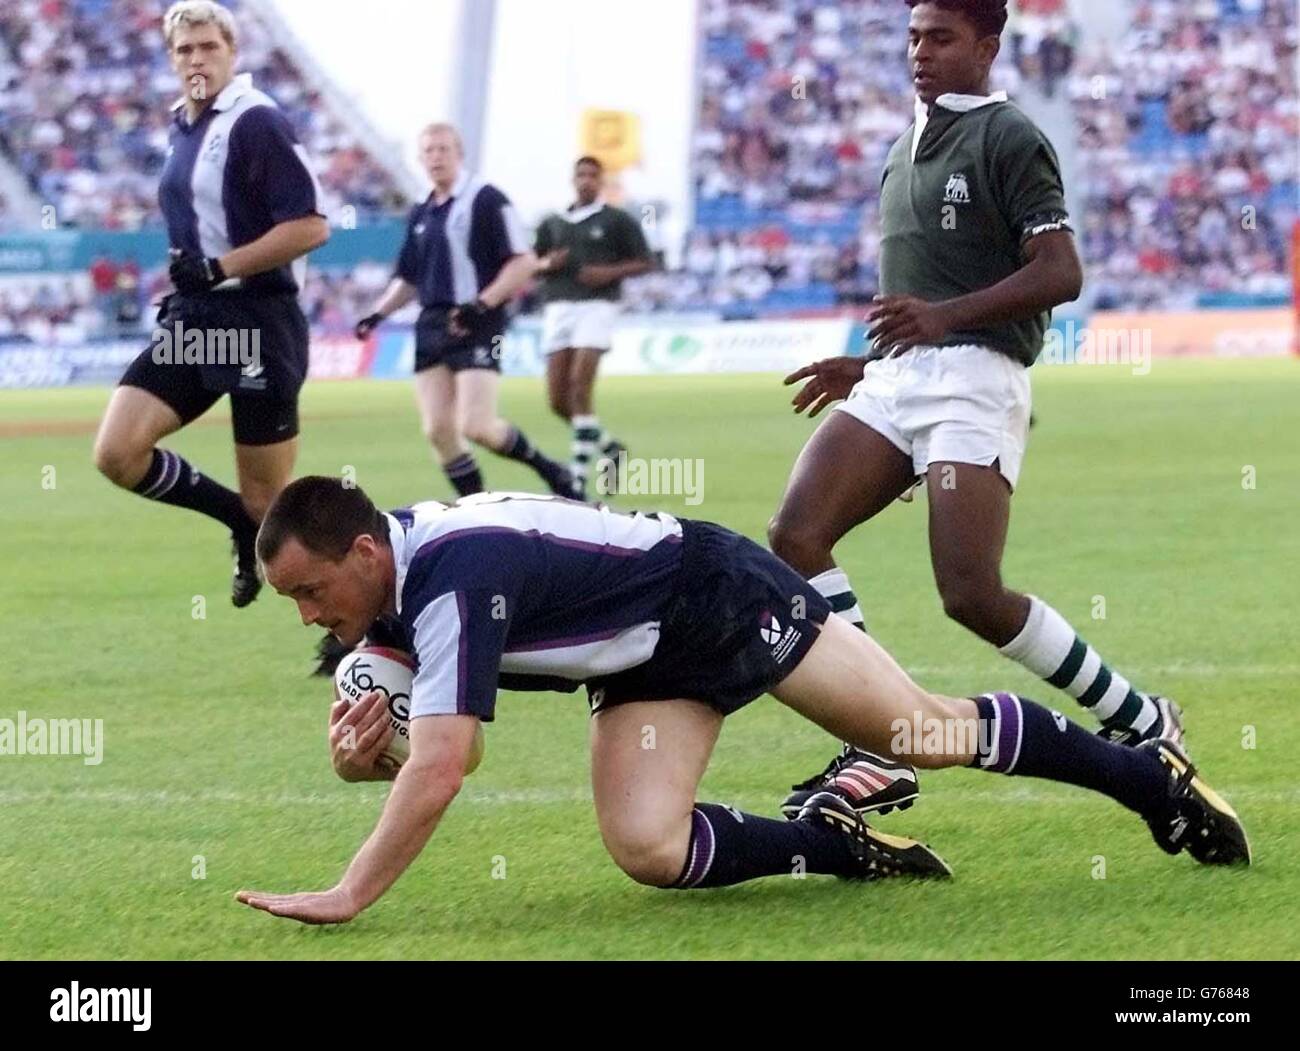 Scotland's Scott Paterson scores his team's opening try during their rugby sevens quarter final game against Sri Lanka in the 2002 Commonwealth Games at the City of Manchester Stadium, Manchester. Stock Photo